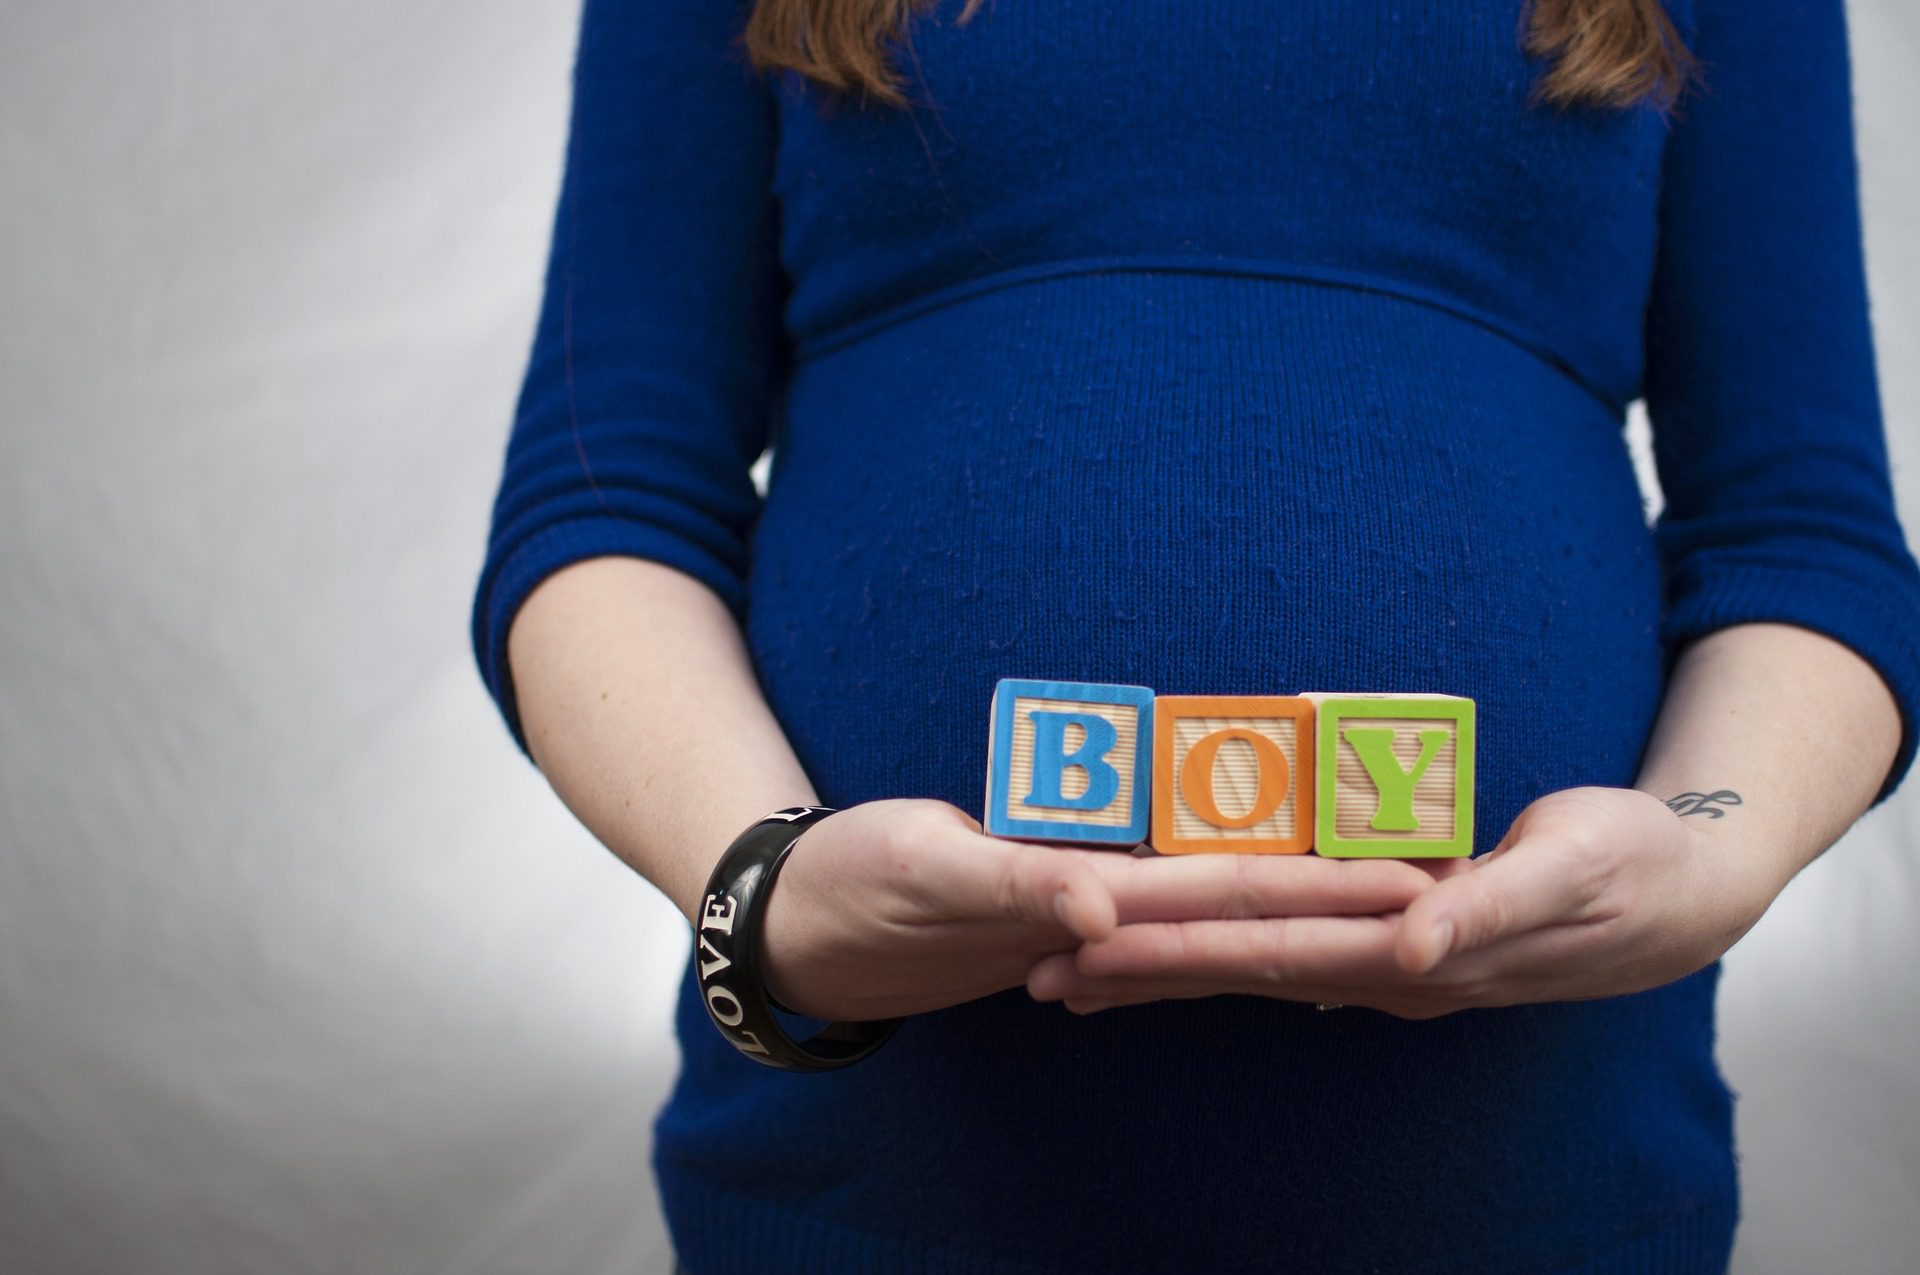 Woman in a blue shirt, holding blocks that say "boy" in front of her pregnant belly.